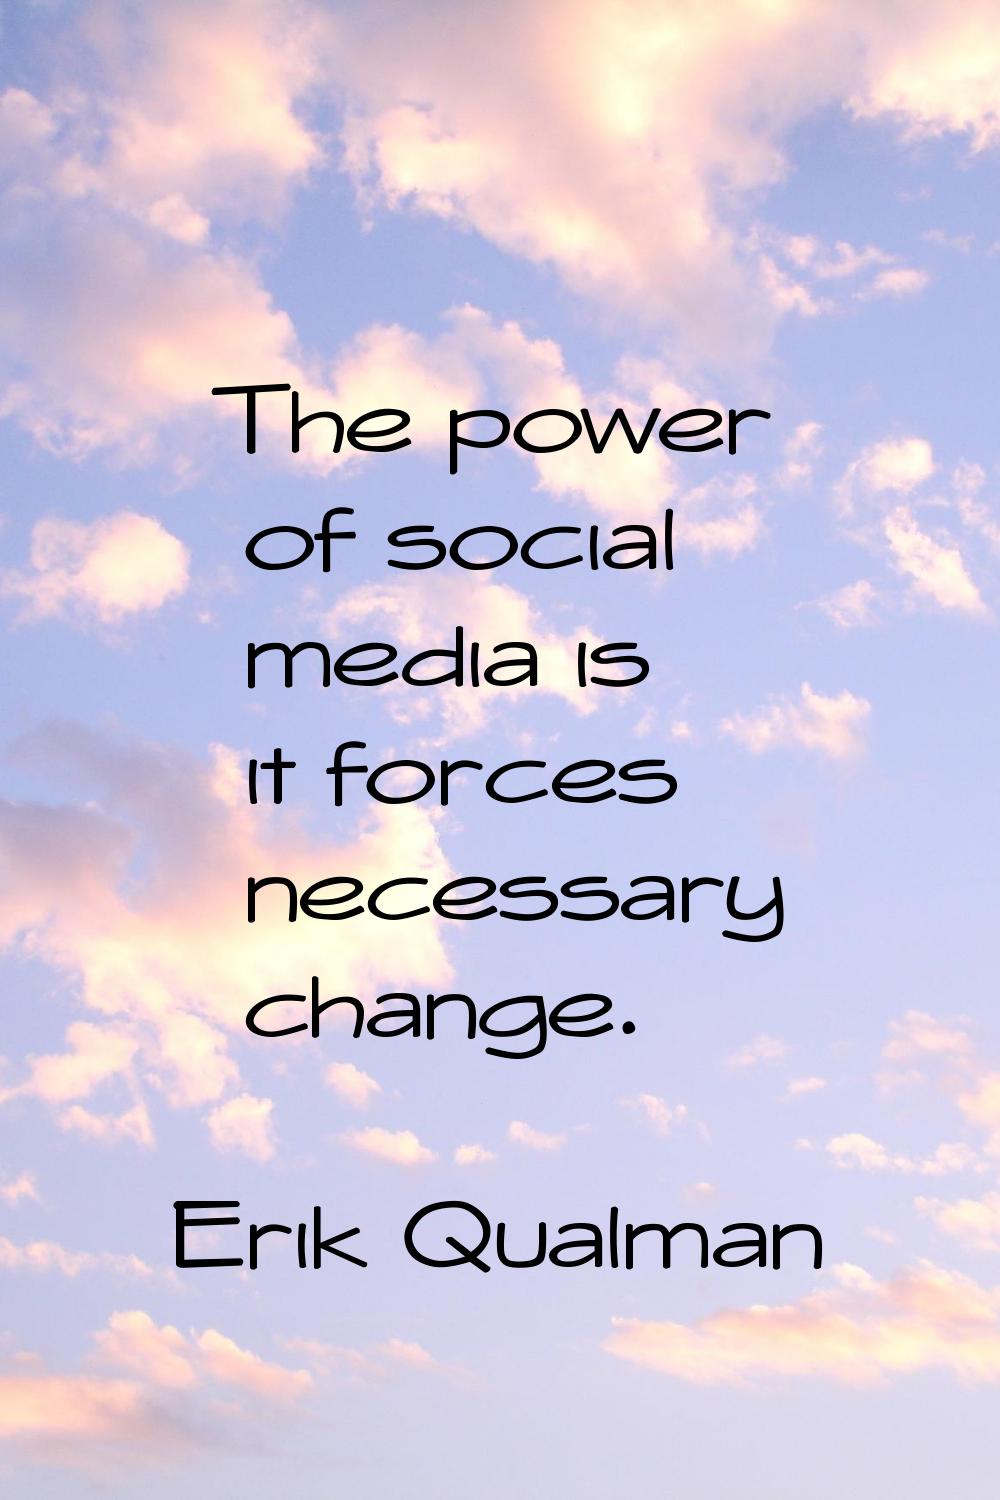 The power of social media is it forces necessary change.